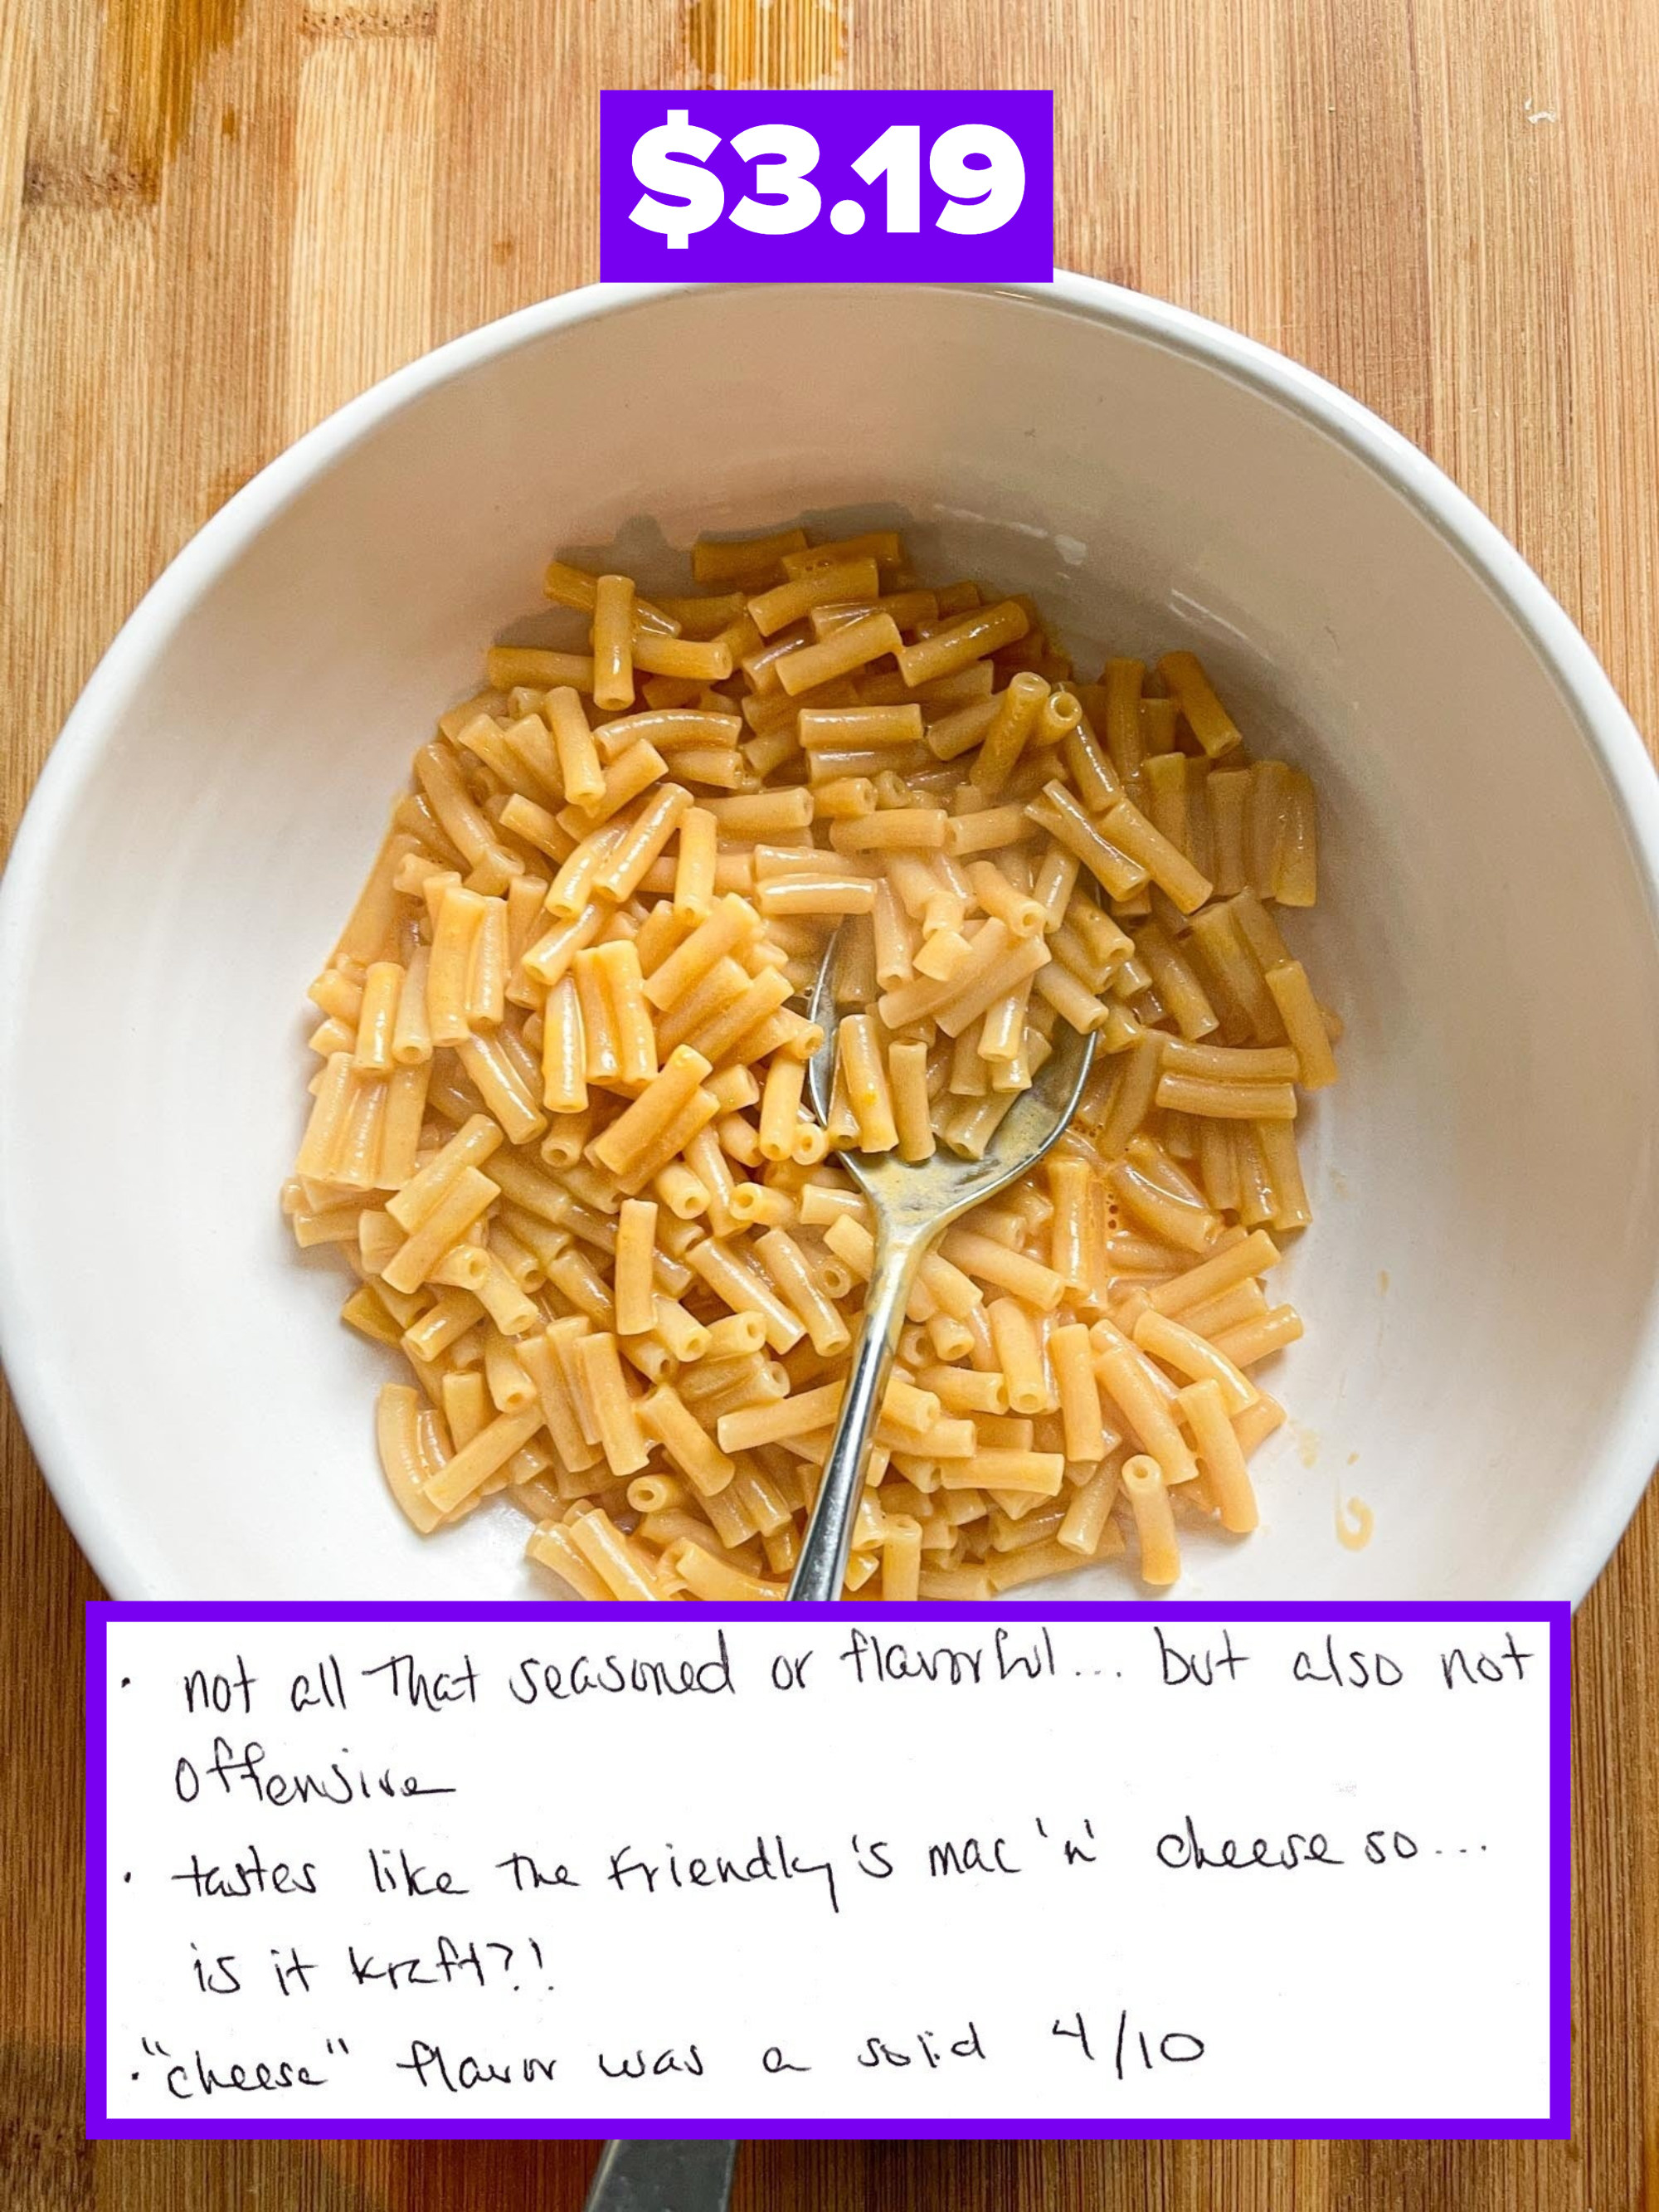 Cost: $3.19; author&#x27;s handwritten notes at the bottom, including &quot;not all that seasoned, but also not offensive&quot; and &quot;tastes like the Friendly&#x27;s mac &#x27;n&#x27; cheese&quot;